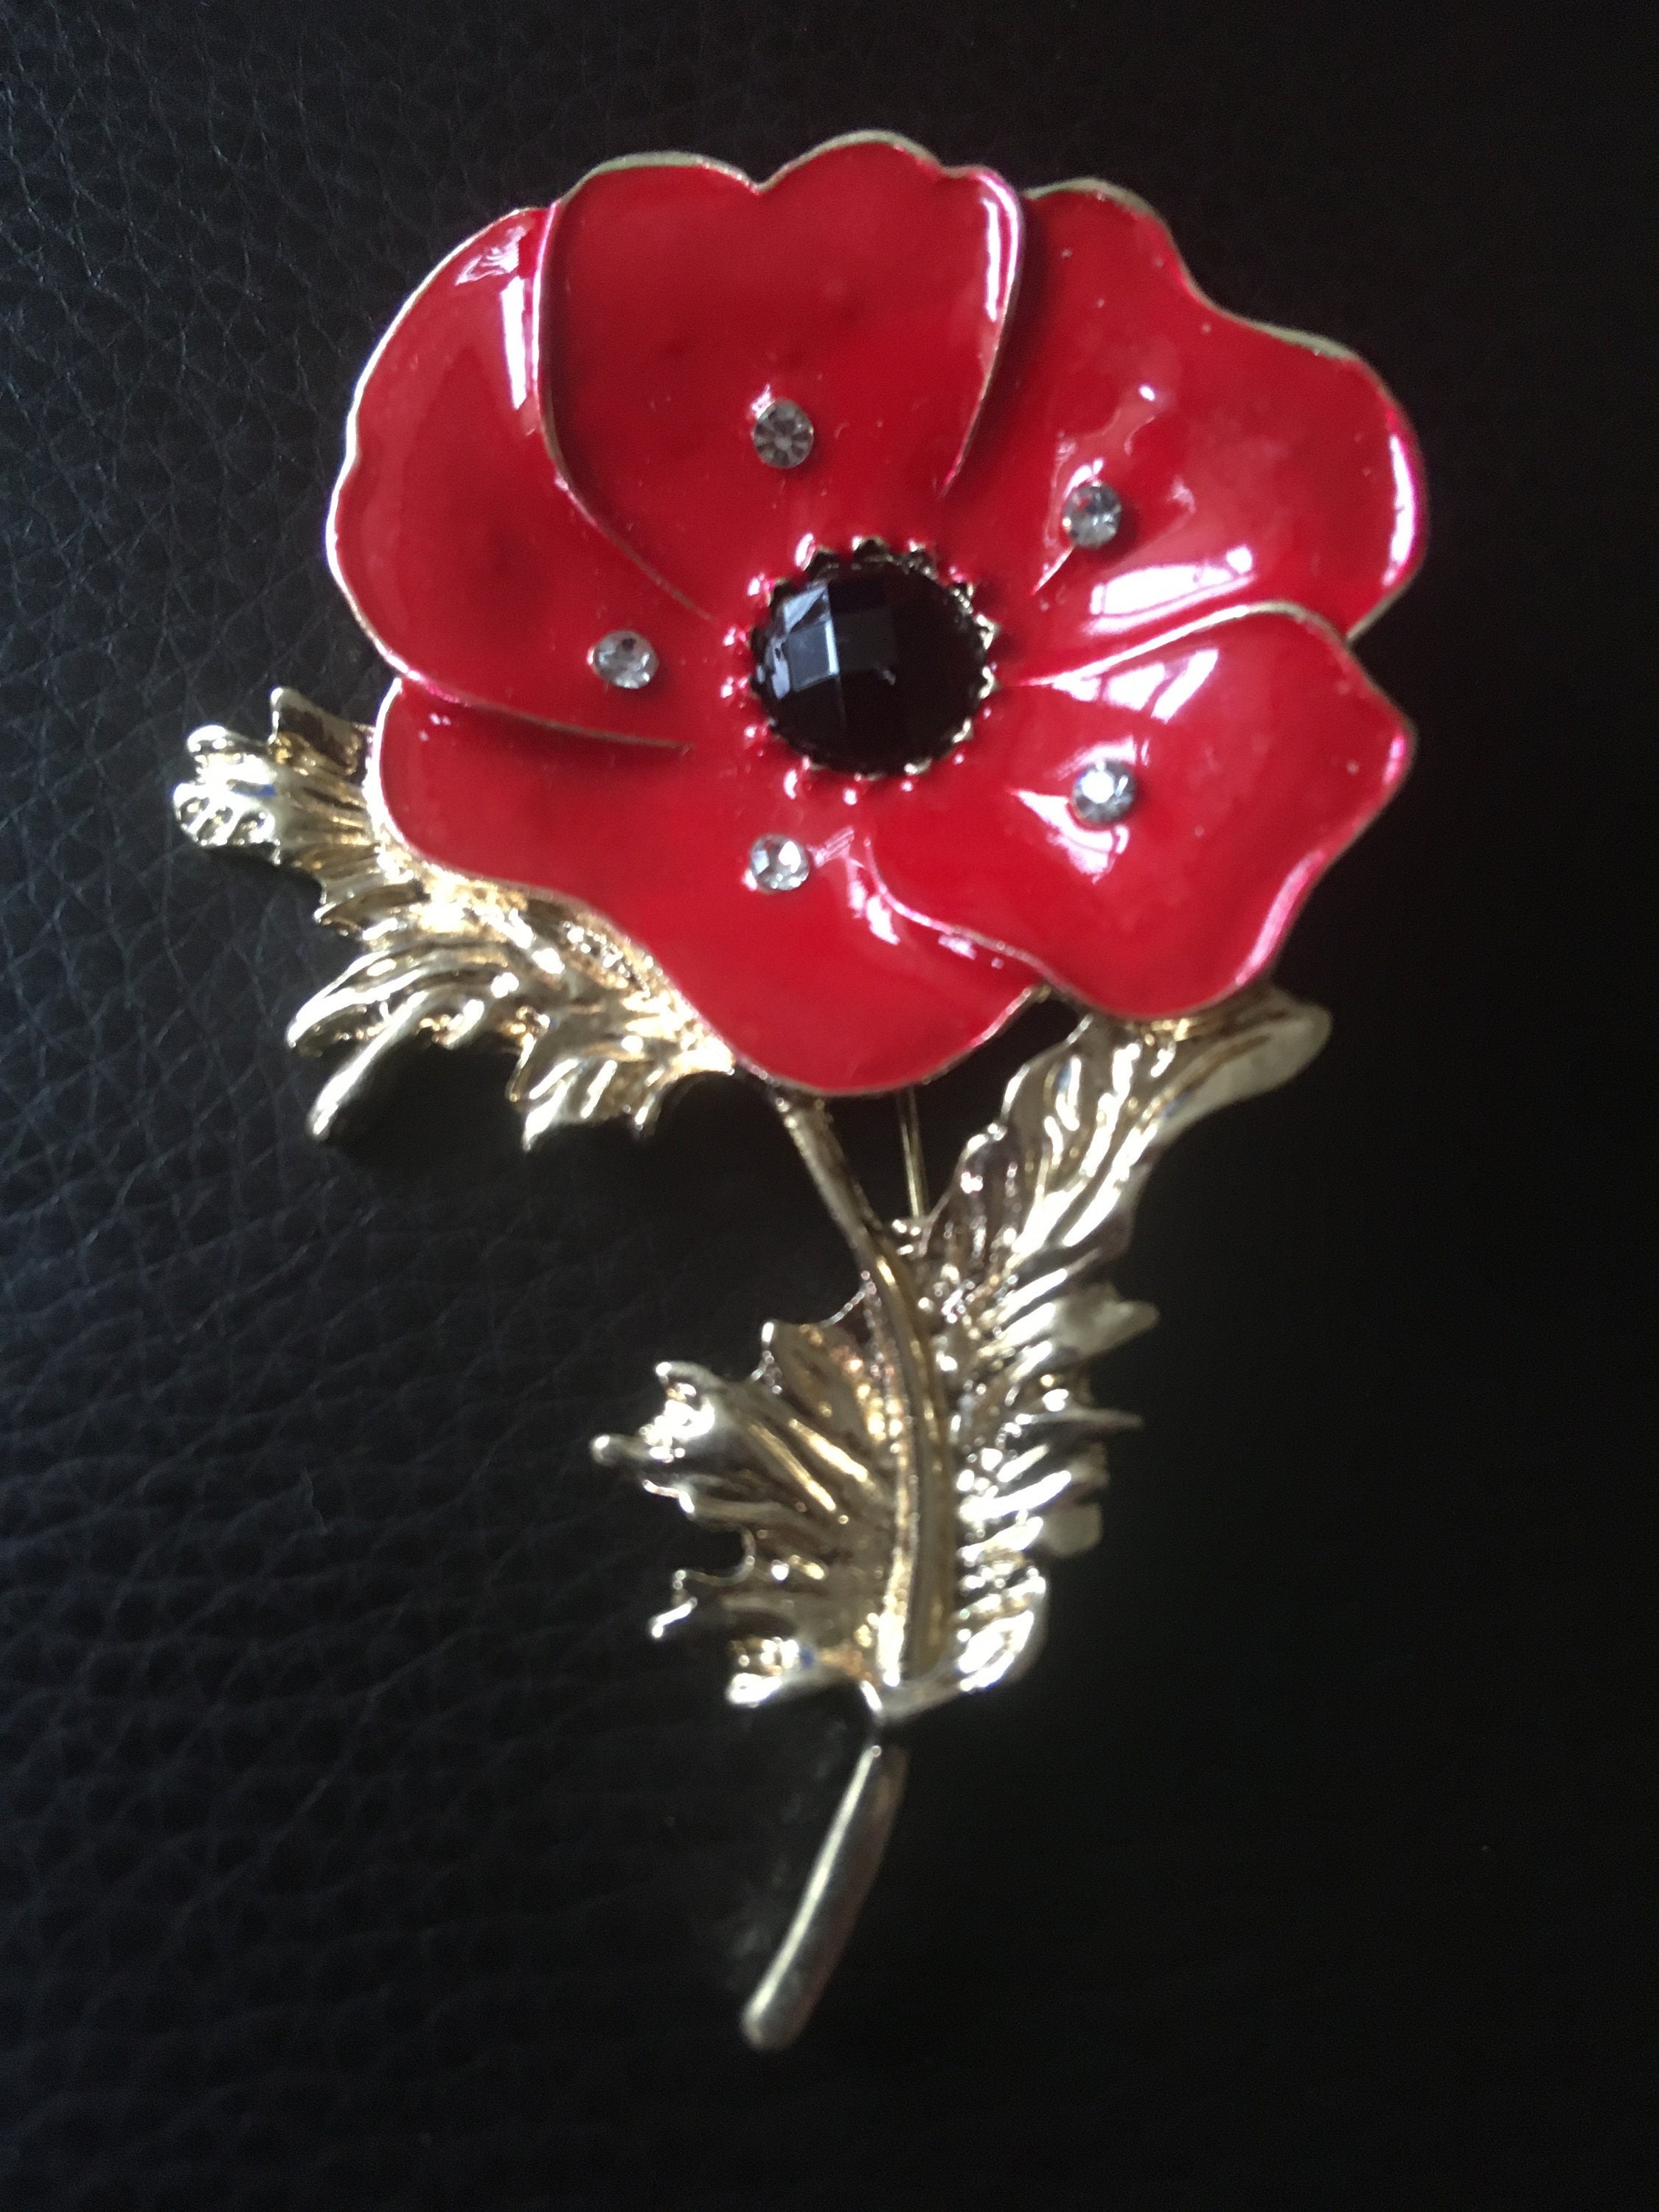 Golden FENICAL 3pcs Poppy Flower Brooch Alloy Badge Brooches Pin Collar Poppy Day Jewelry Gift 